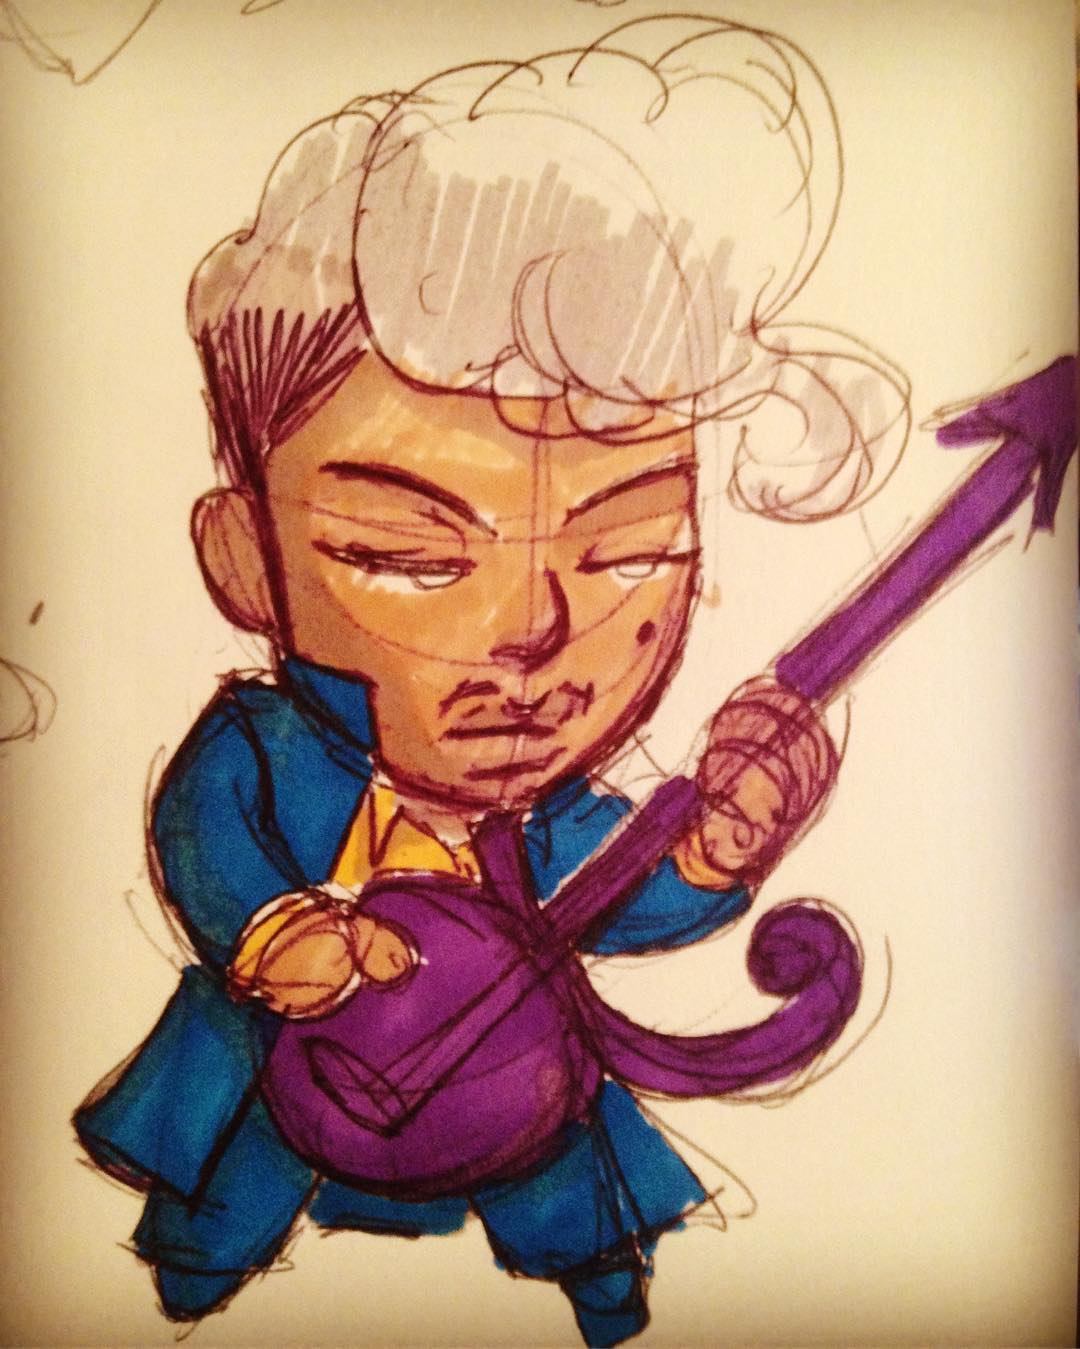 Sketch: Prince chibi style by Miguel Guerra